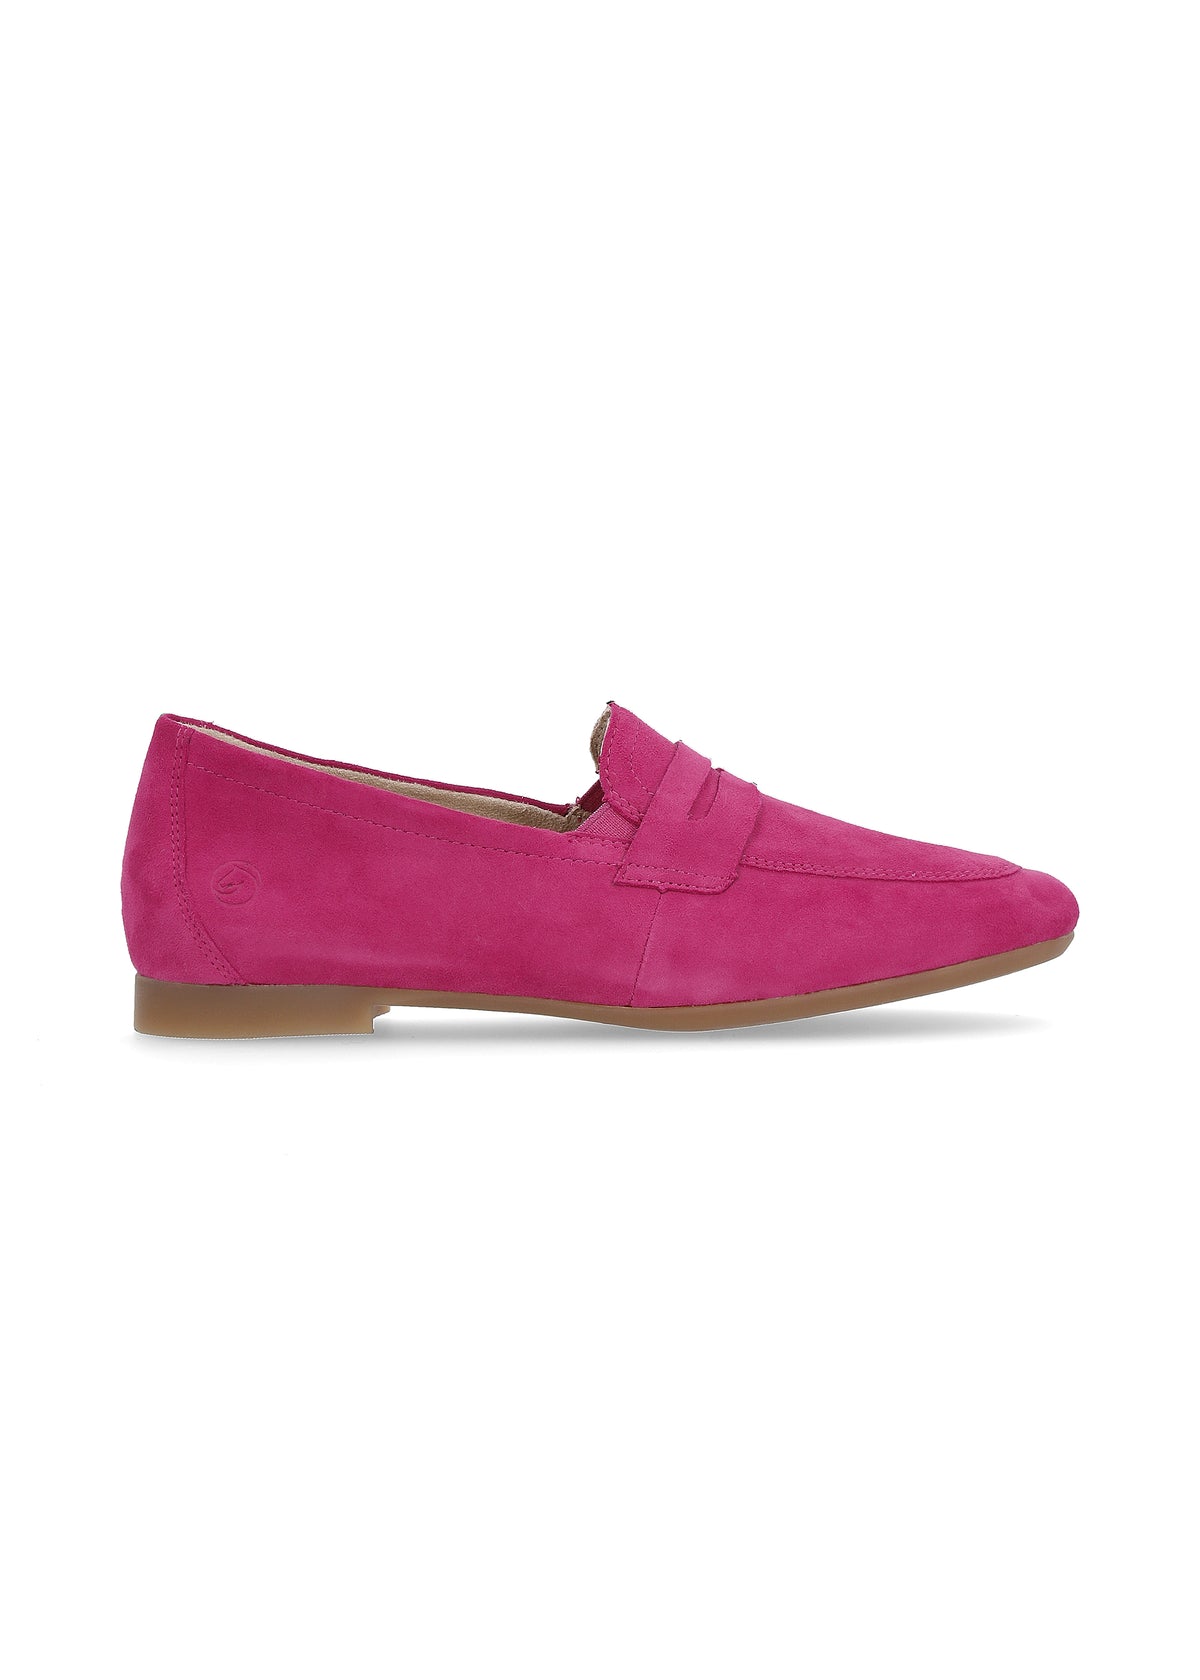 Loafers - pink suede, loafer strap as decoration